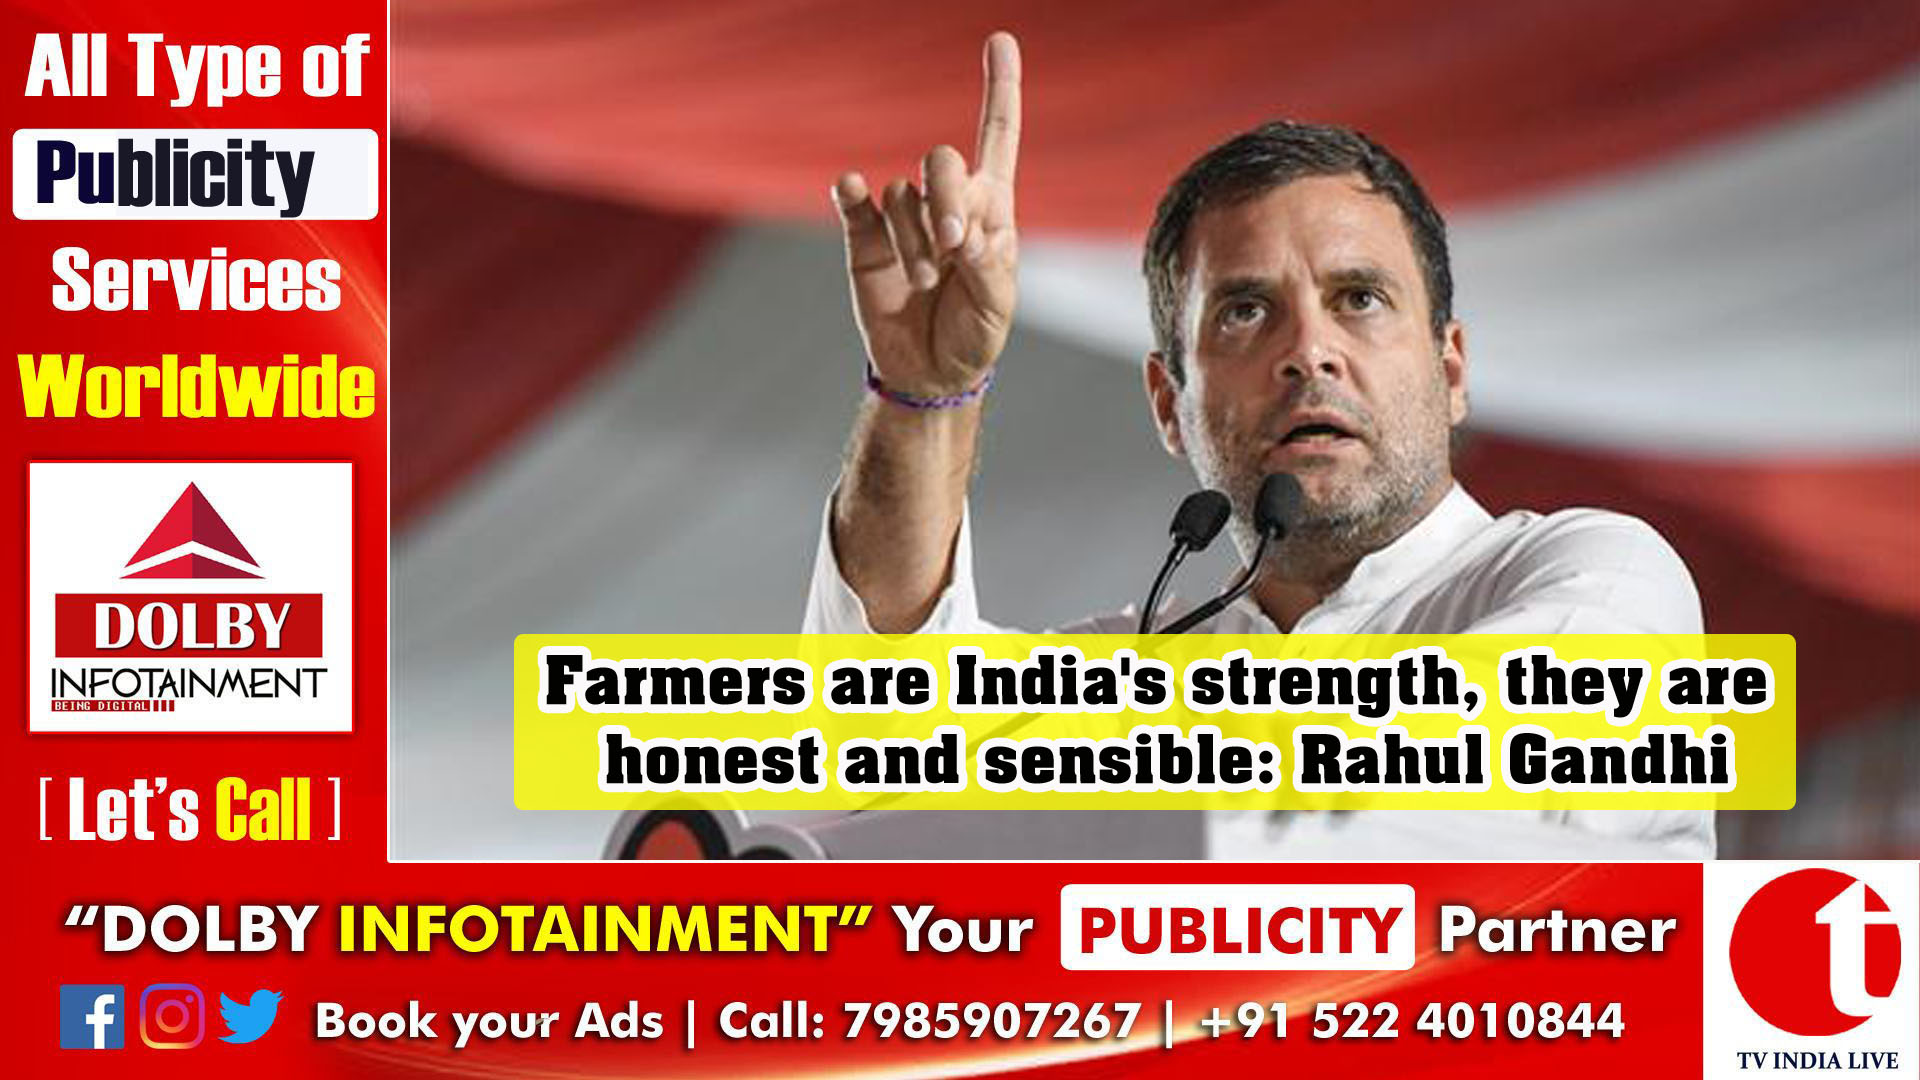 Farmers are India's strength, they are honest and sensible: Rahul Gandhi